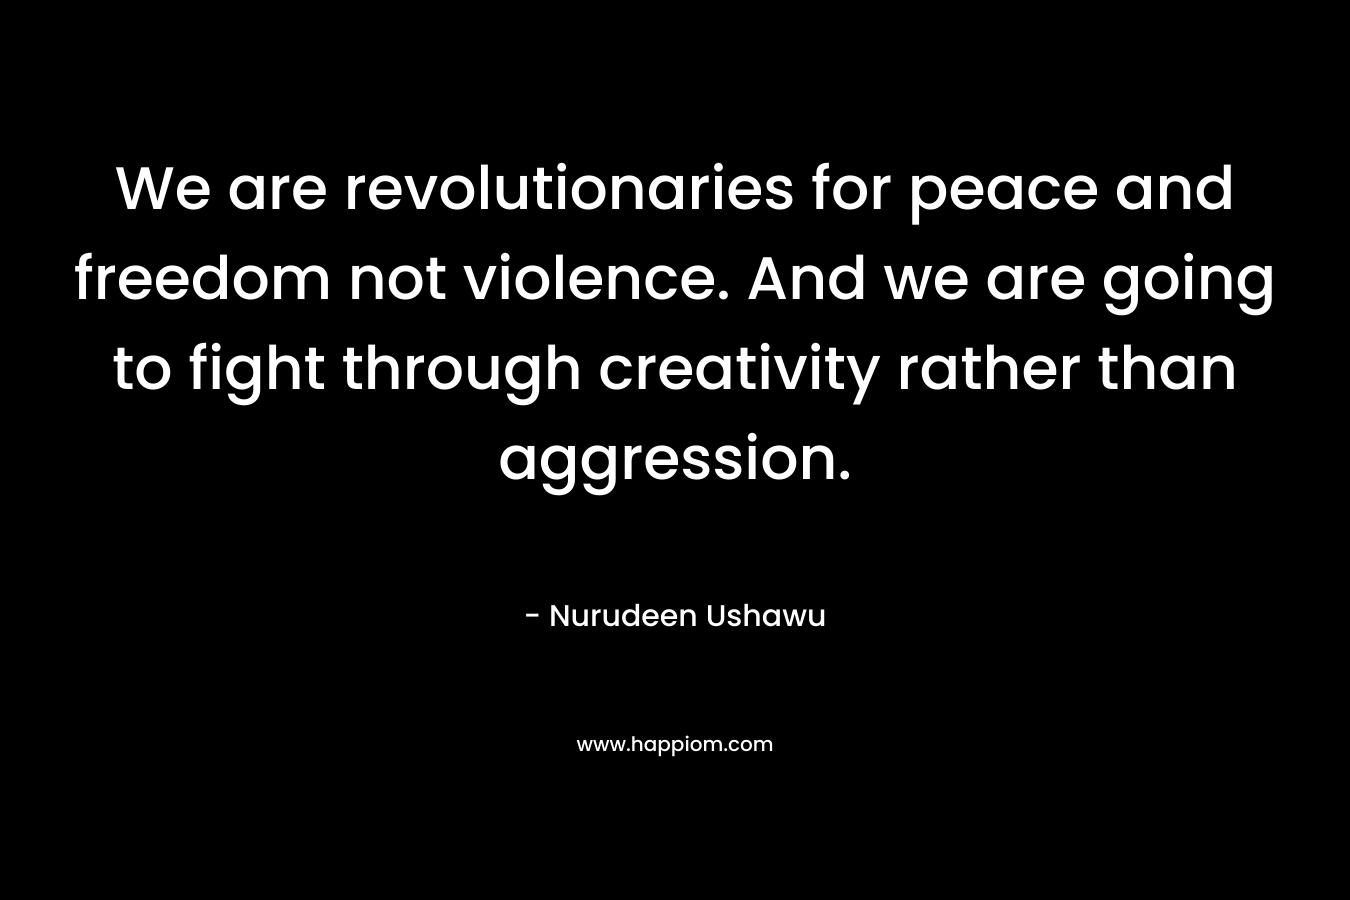 We are revolutionaries for peace and freedom not violence. And we are going to fight through creativity rather than aggression. – Nurudeen Ushawu